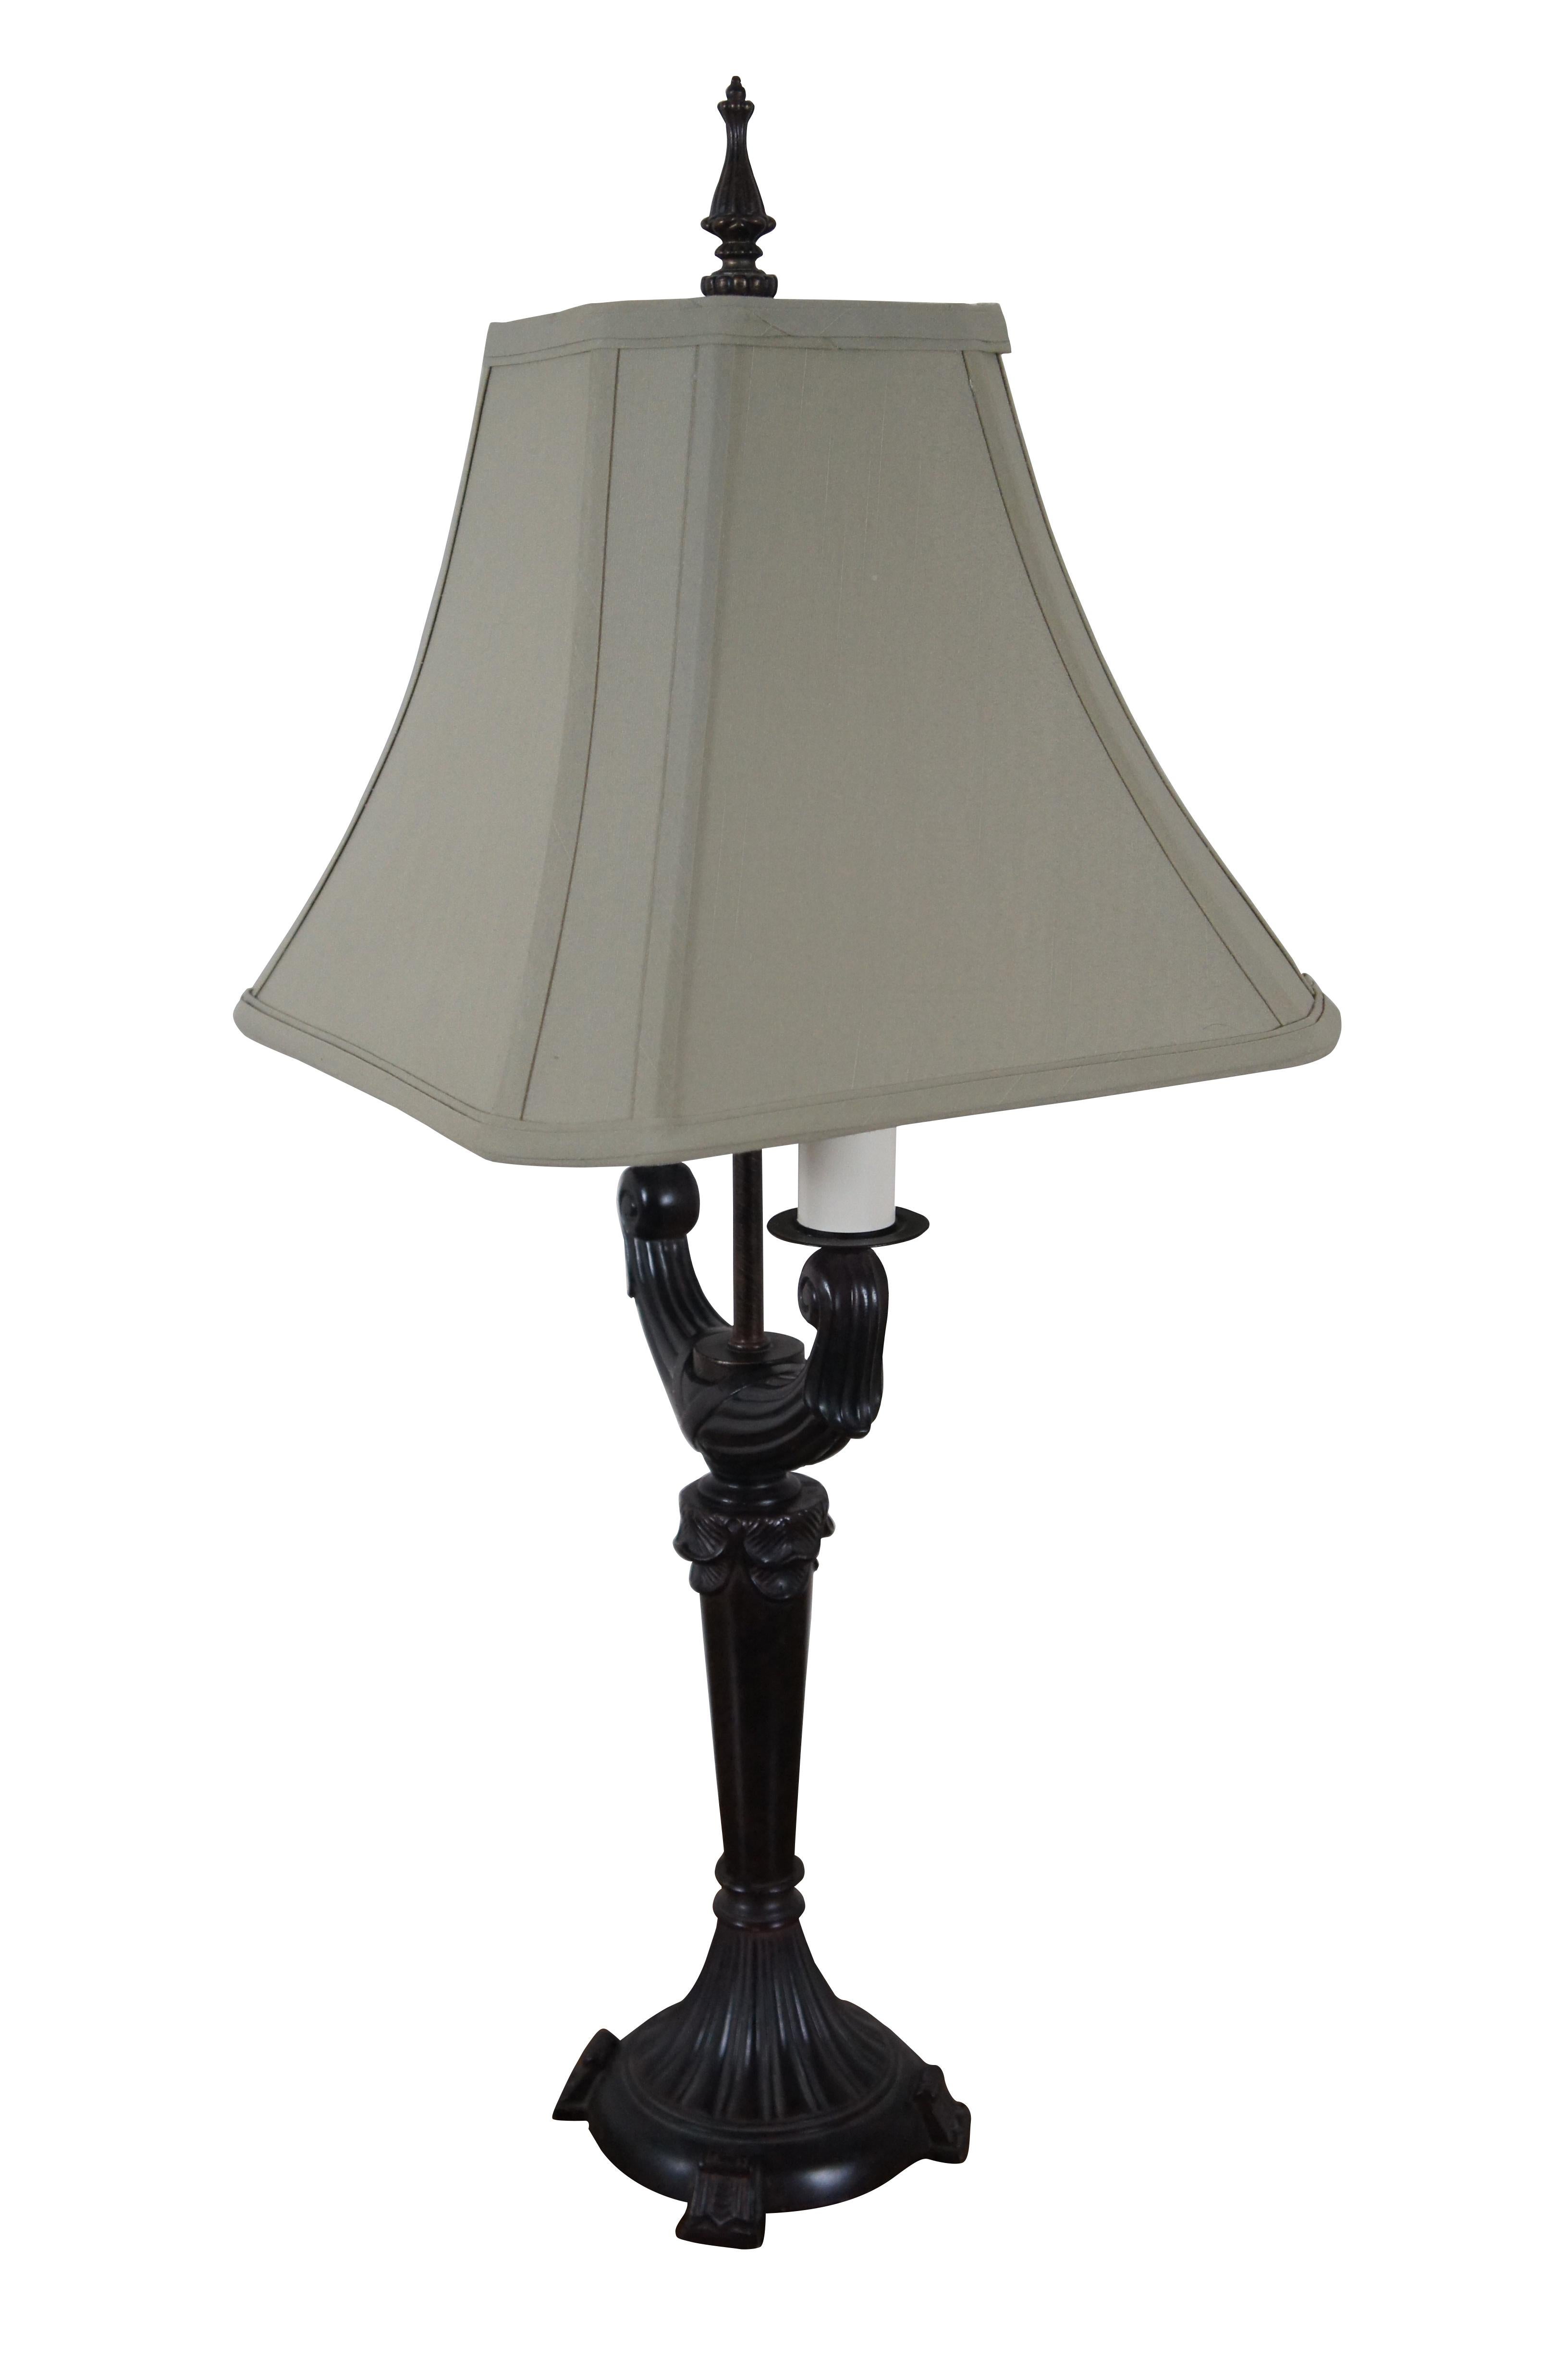 Modern resin table lamp in the shape of a neoclassical column with double arm candelabra style top and ornate finial, finished in brushed burgundy / dark brown paint. Includes a sage green, square cut-corner shade.

Dimensions:
8.5” x 5.5” x